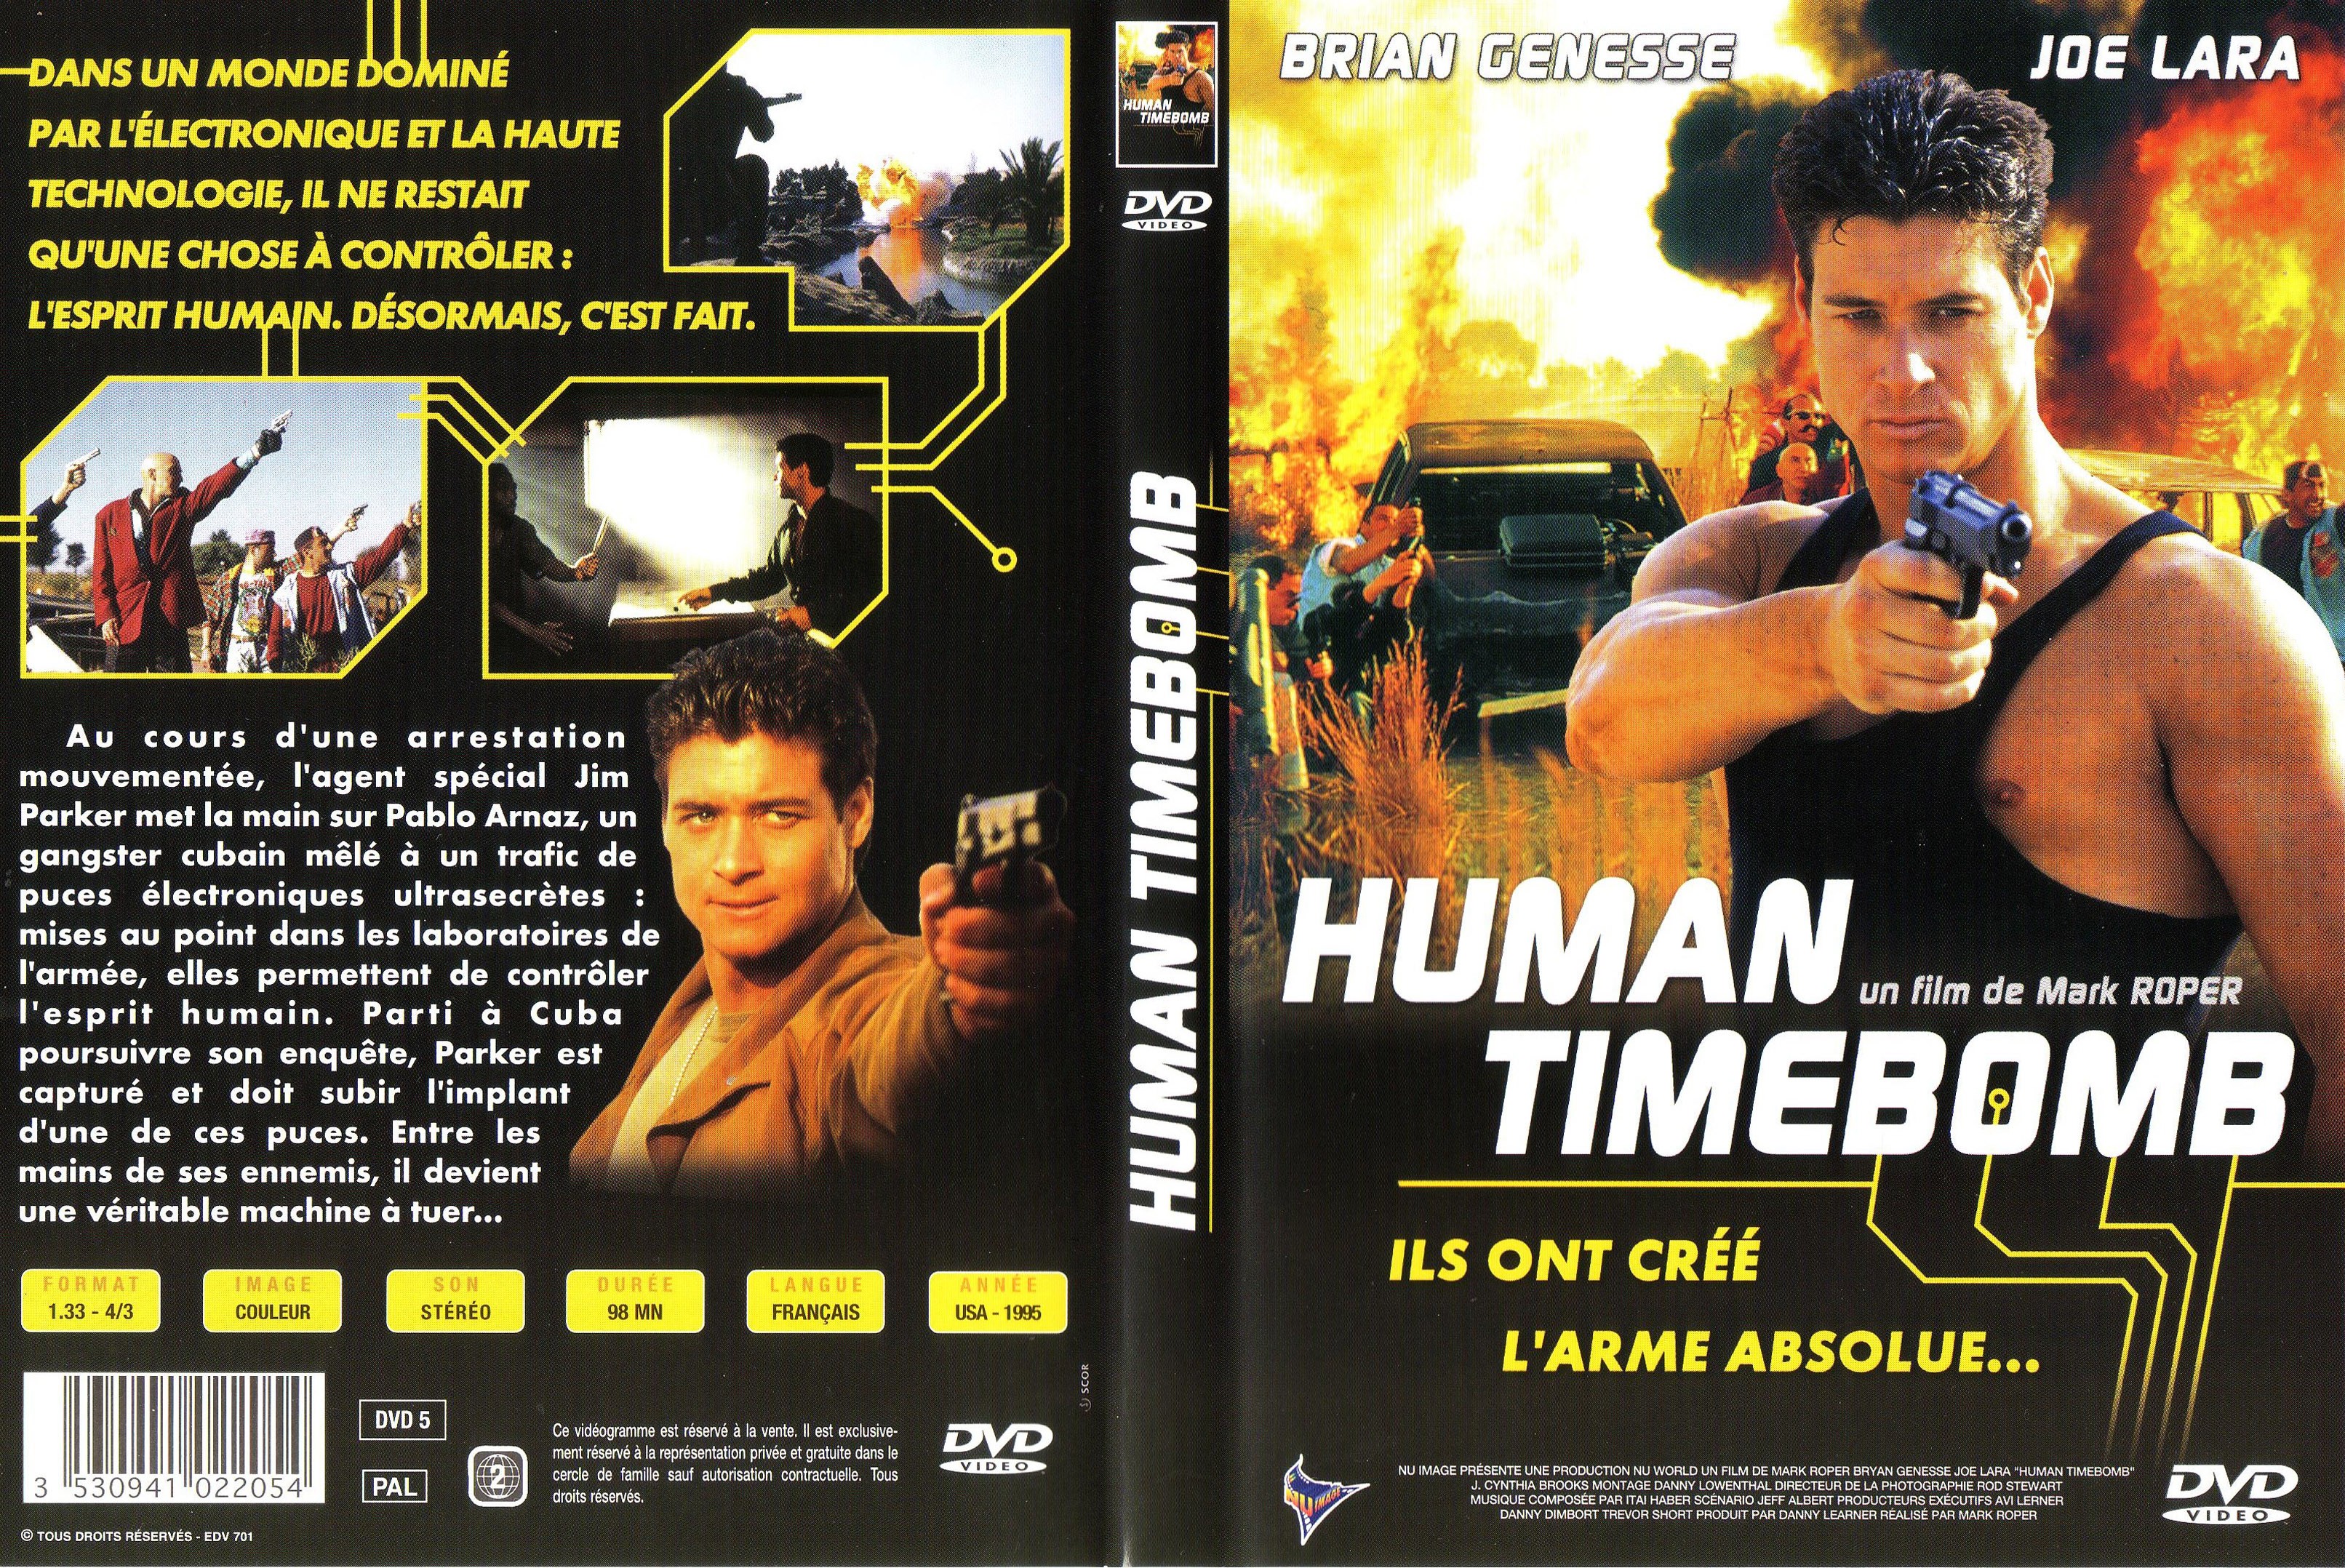 Jaquette DVD Human timebomb